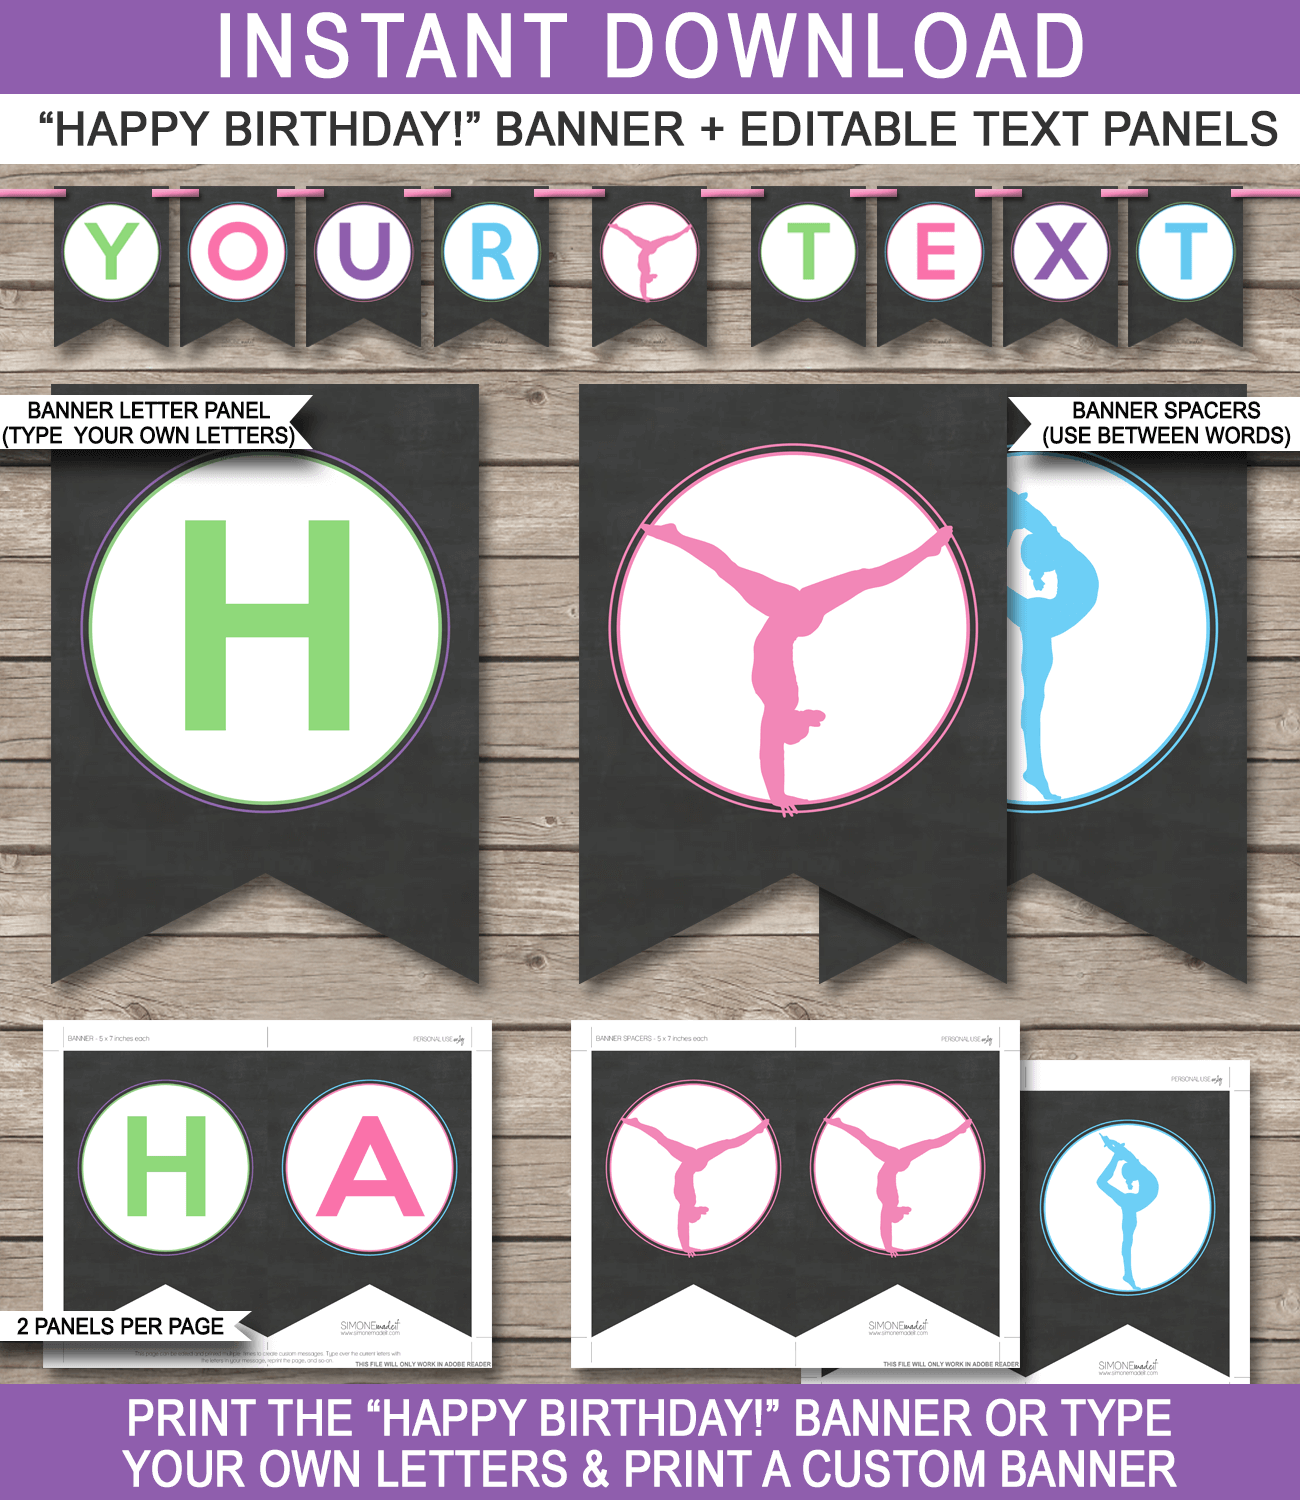 Gymnastics Party Banner Template - Gymnastics Bunting - Happy Birthday Banner - Chalkboard - Birthday Party - Editable and Printable DIY Template - INSTANT DOWNLOAD $4.50 via simonemadeit.com